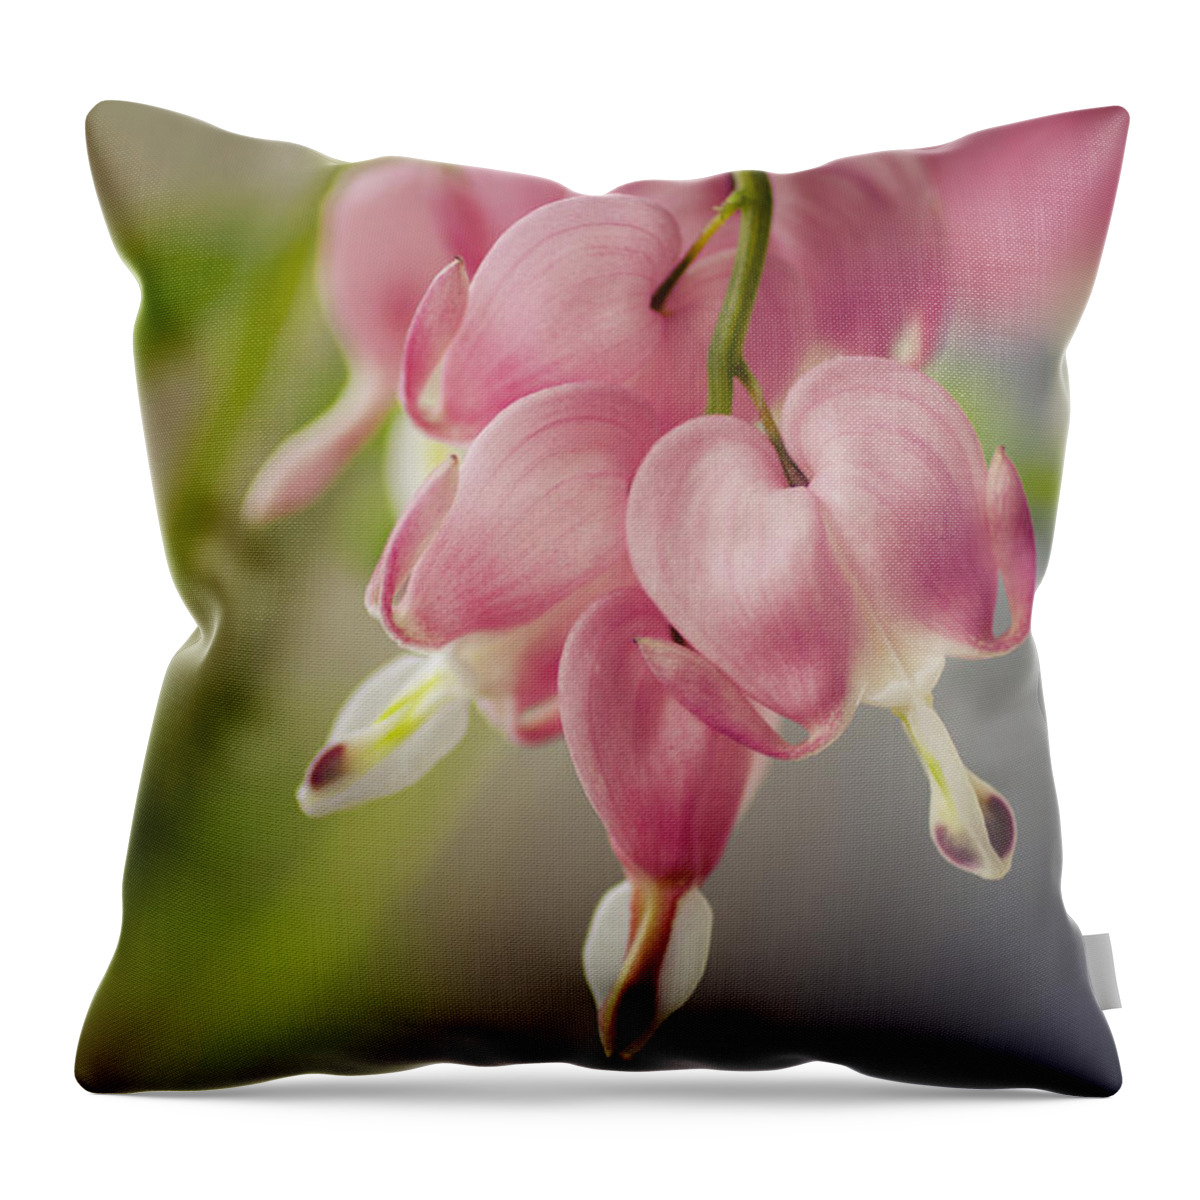 Arching Flower Stems Throw Pillow featuring the photograph Flower Love by Teri Virbickis